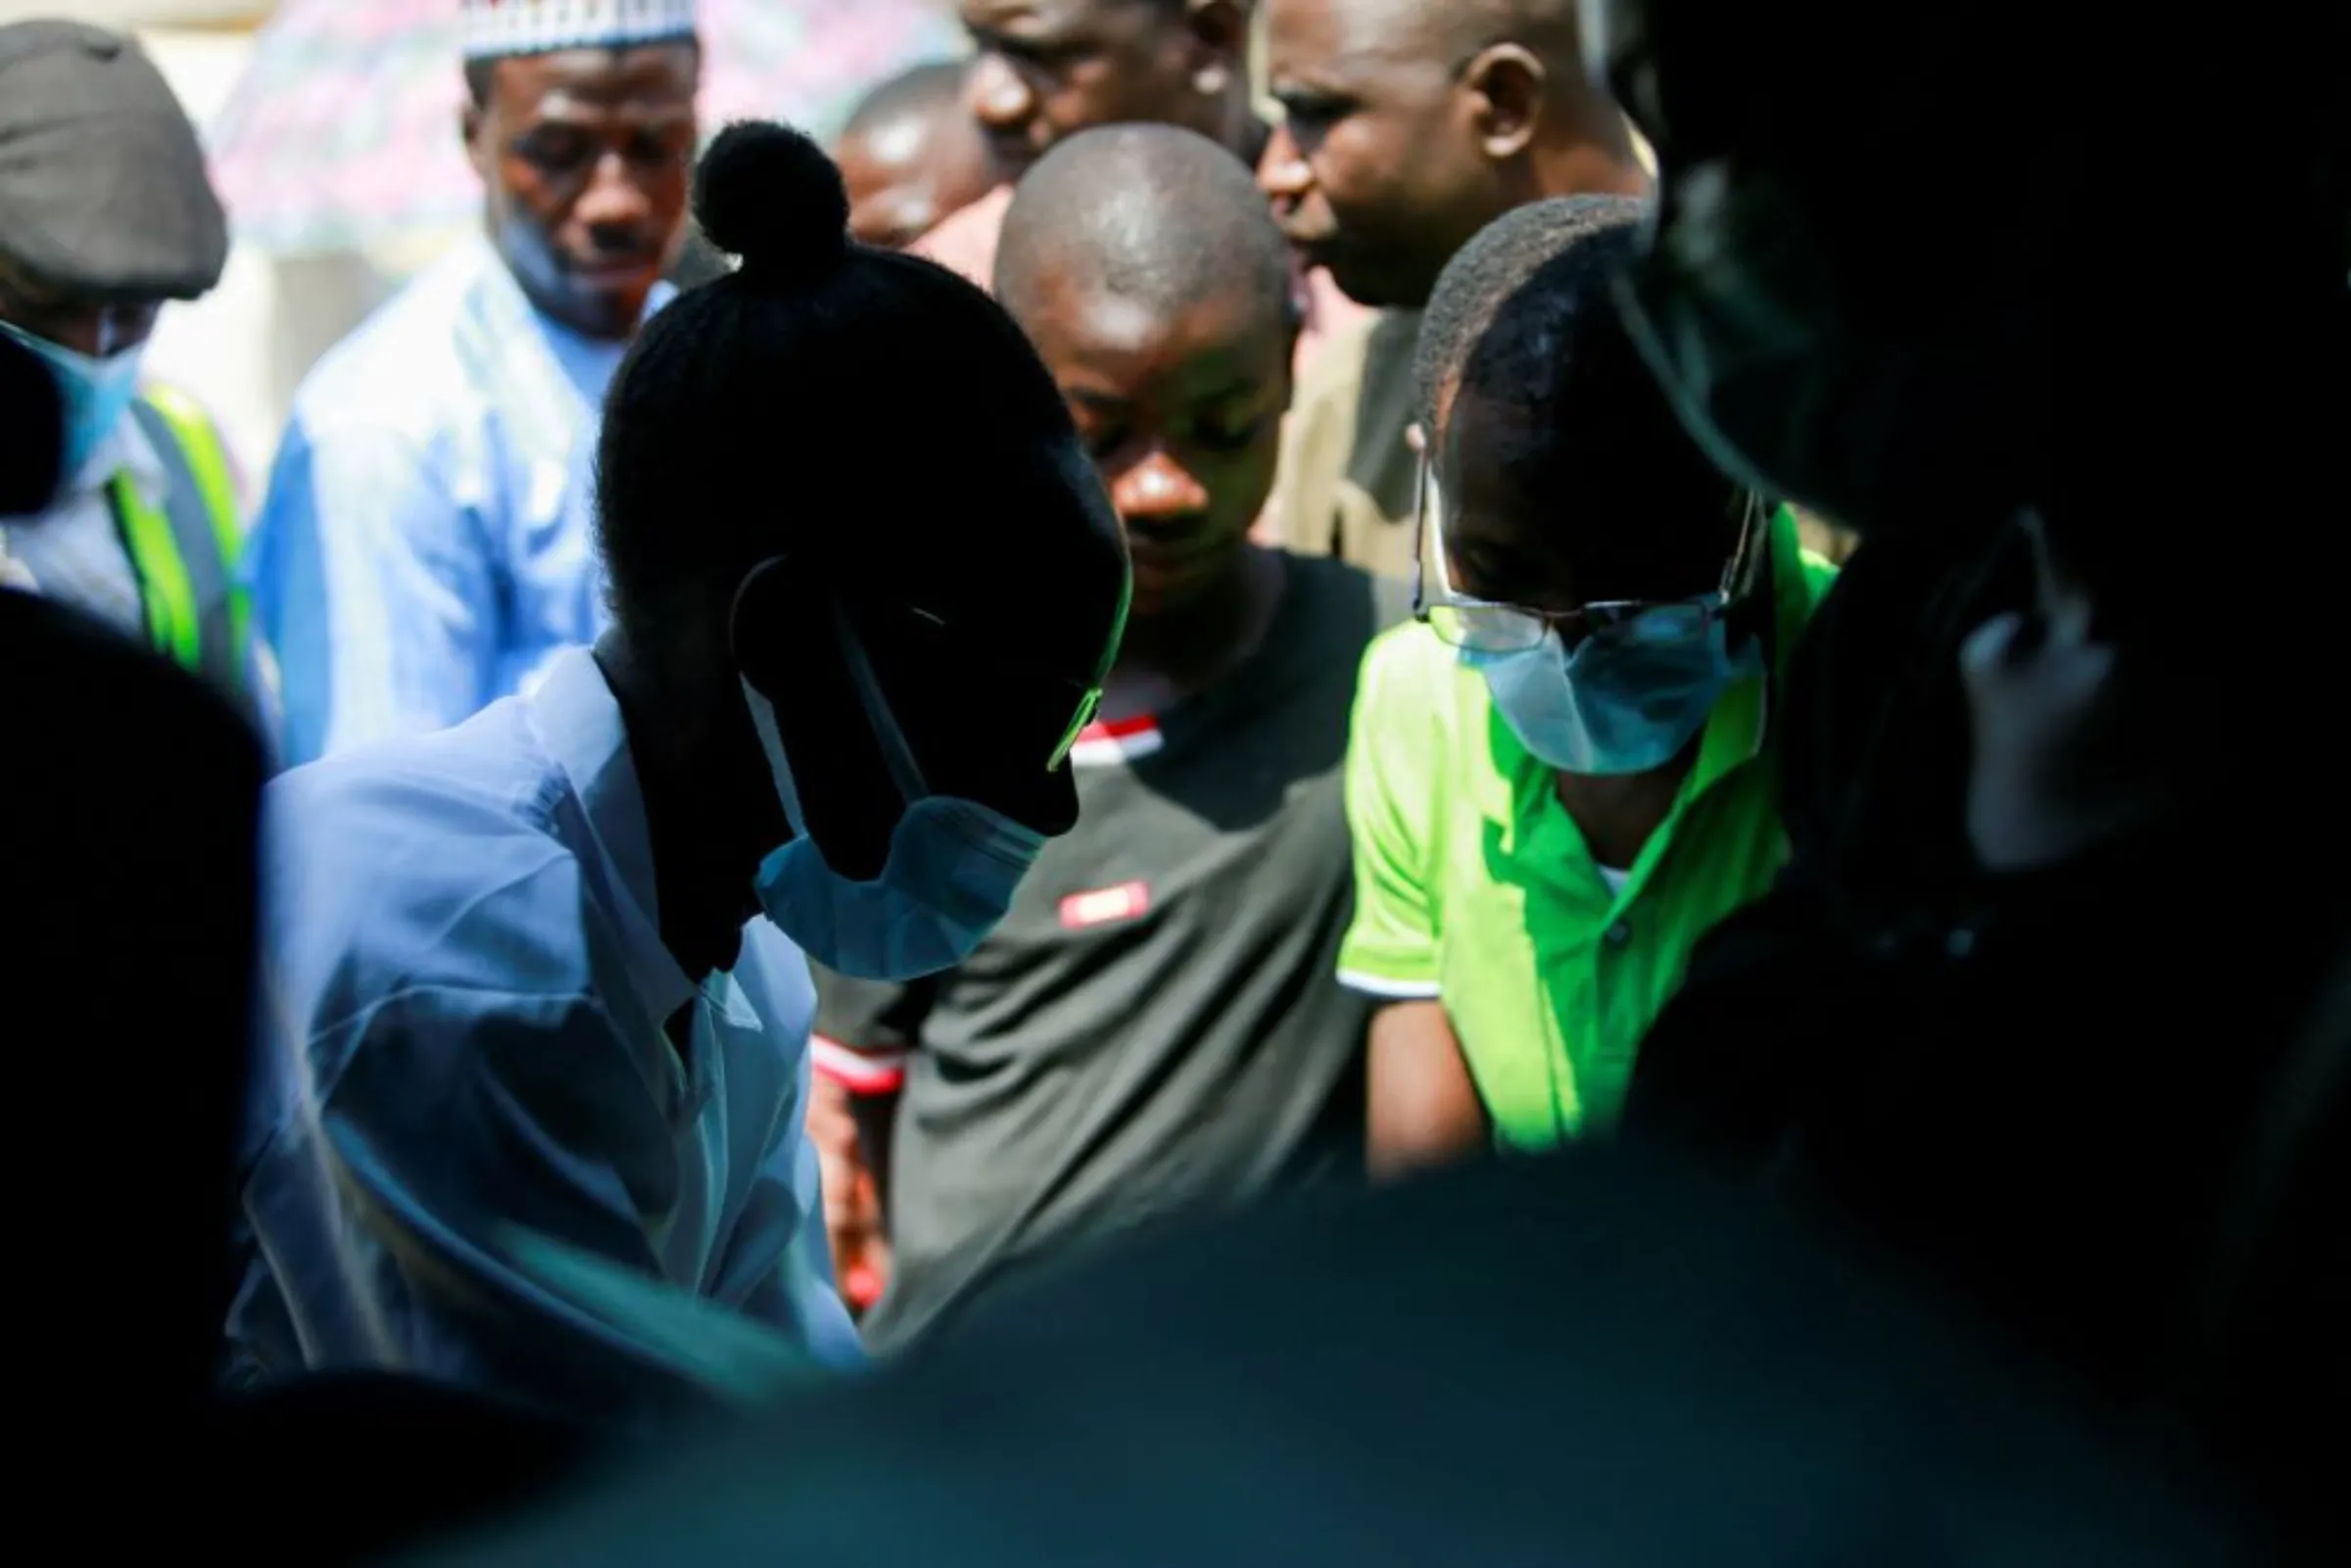 Health workers are seen working during a mass vaccination exercise, at Wuse market in Abuja, Nigeria January 26, 2022